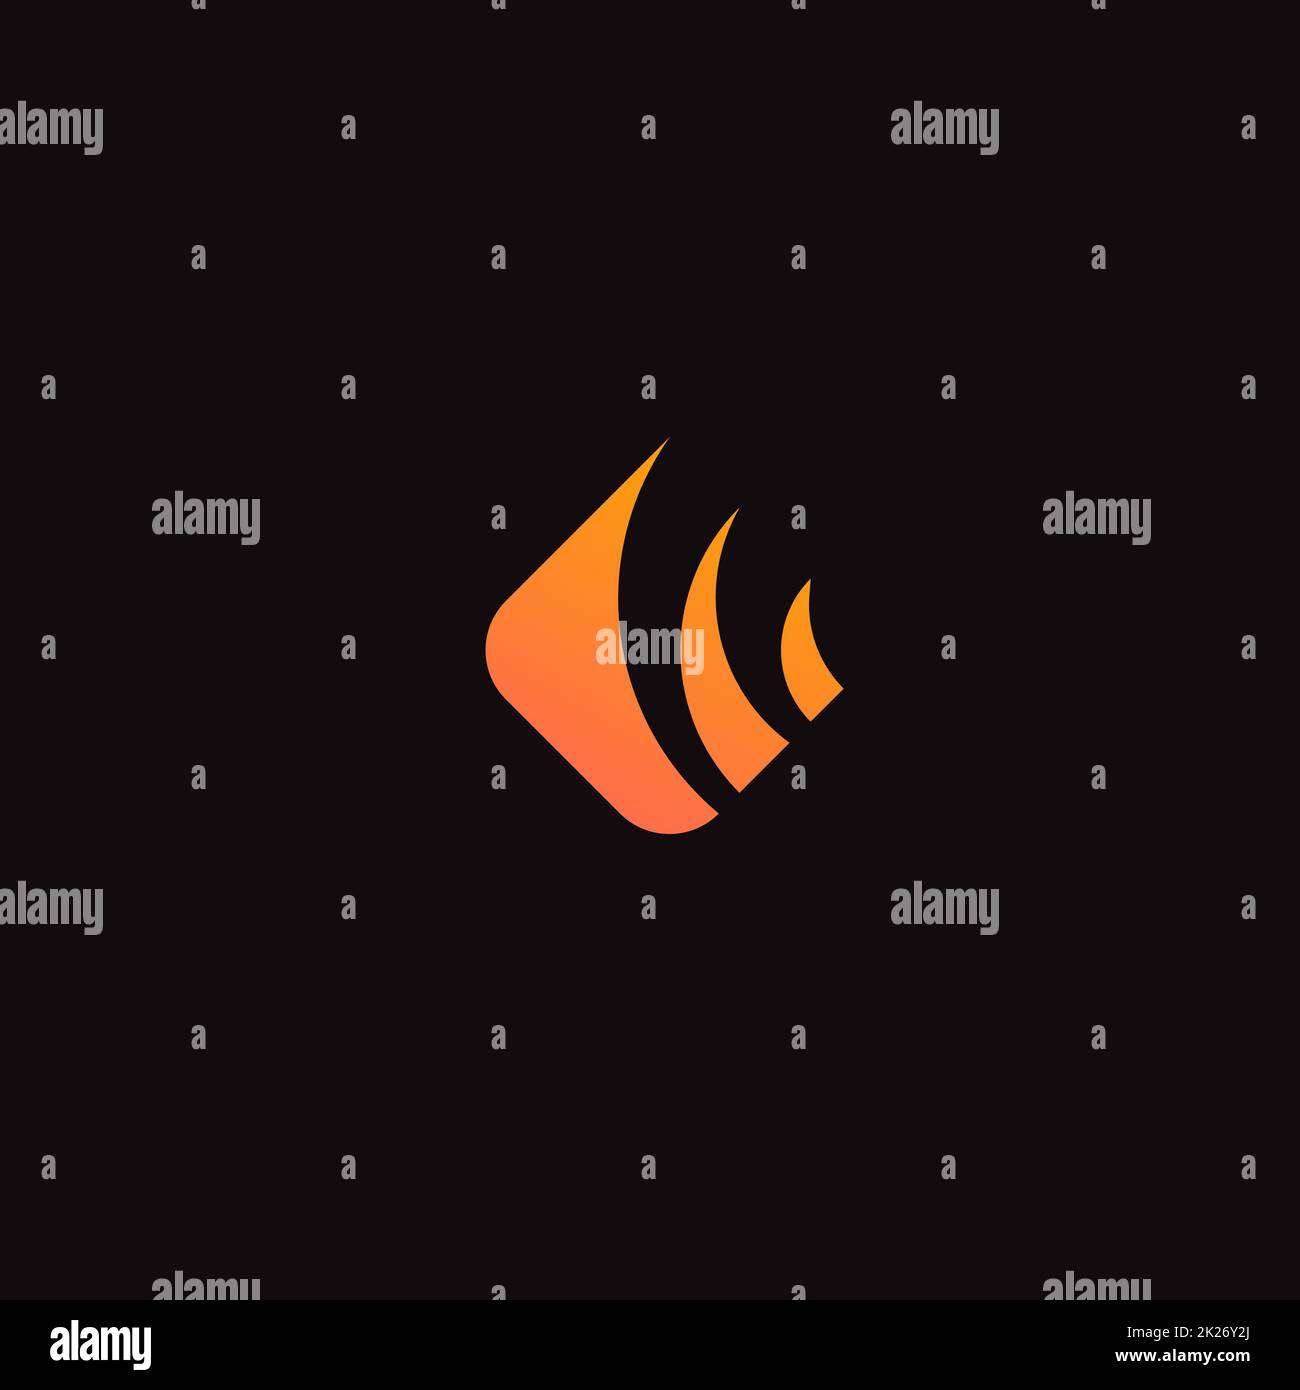 Fire icon, abstract logo template. Burning flame symbol, rhombus shape label. Isolated minimal silhouette style logotype design. Orange vector sign Stock Photo